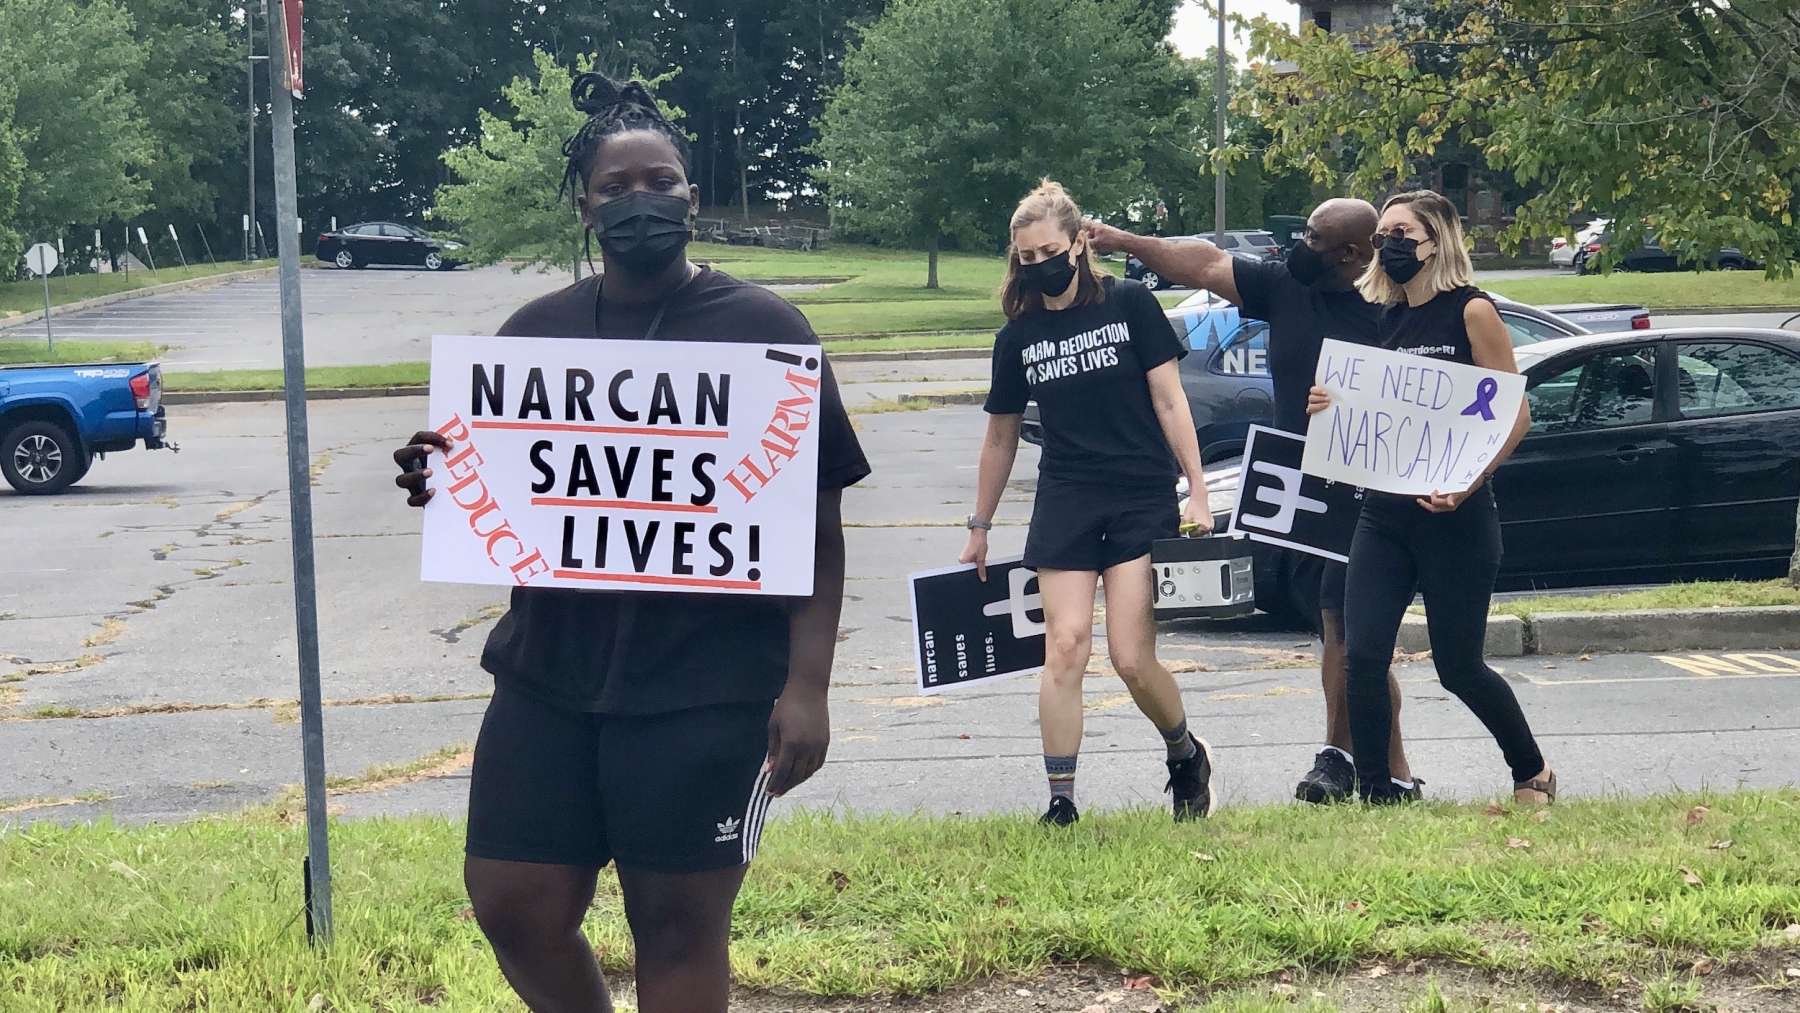 Rhode Island News: Advocates rally, stage ‘die-in’ for dedicated narcan funding stream